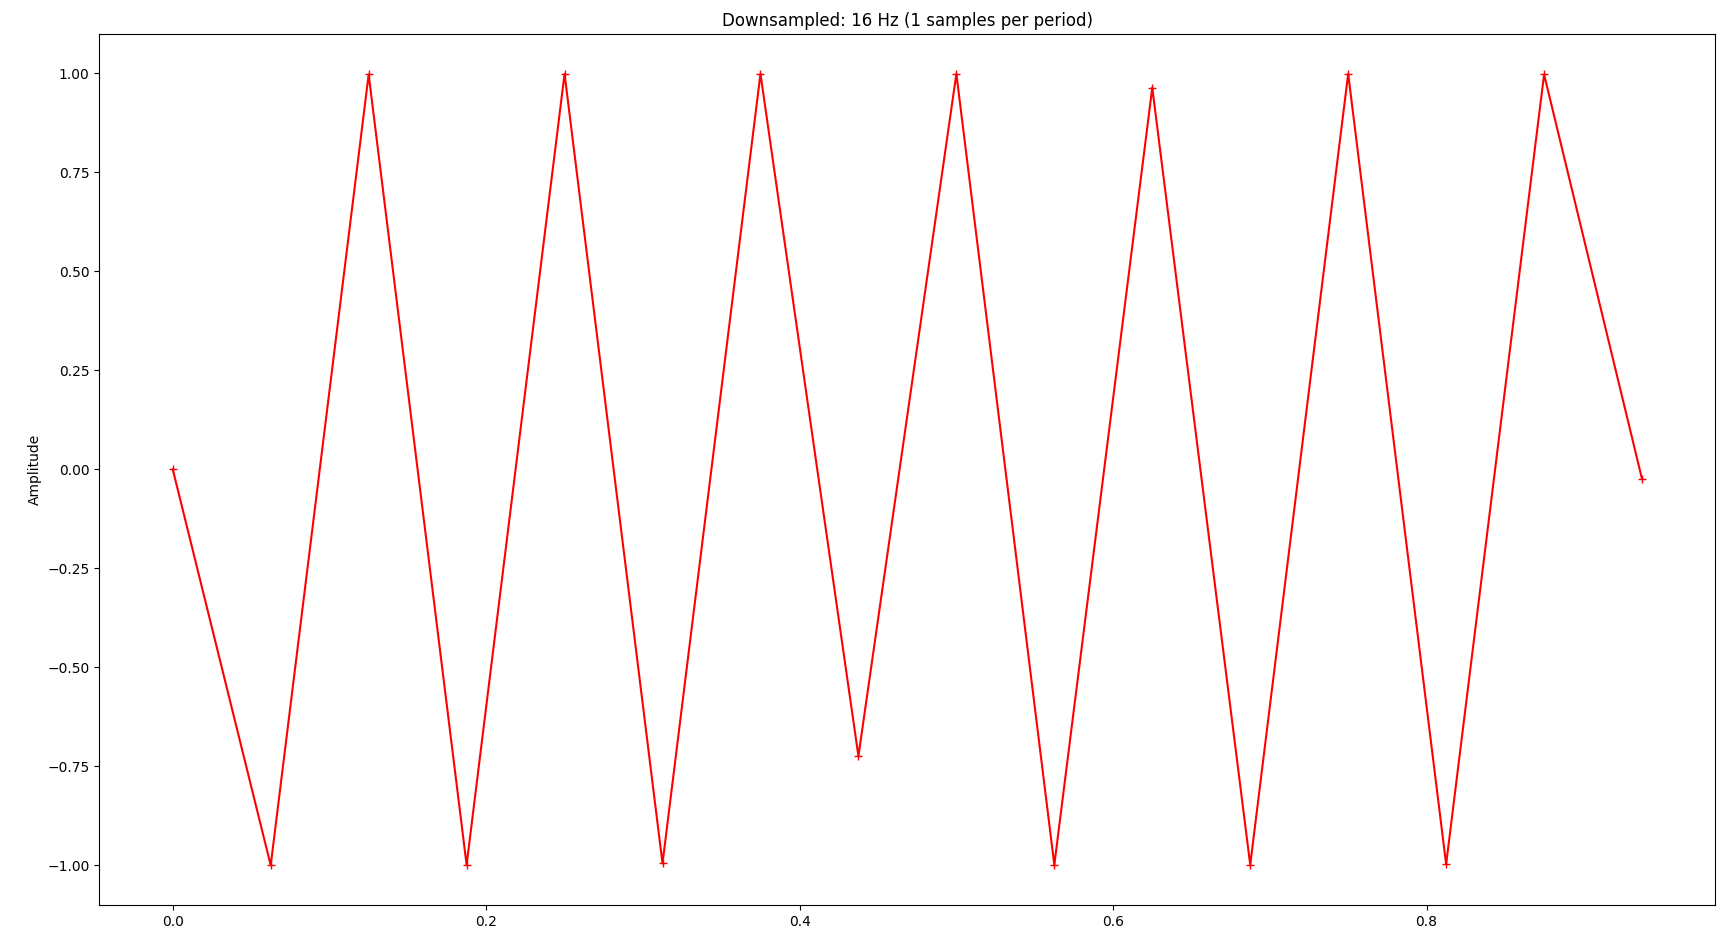 A sine wave with 16 Hz consisting of 4096 samples downsampled to 16 samples